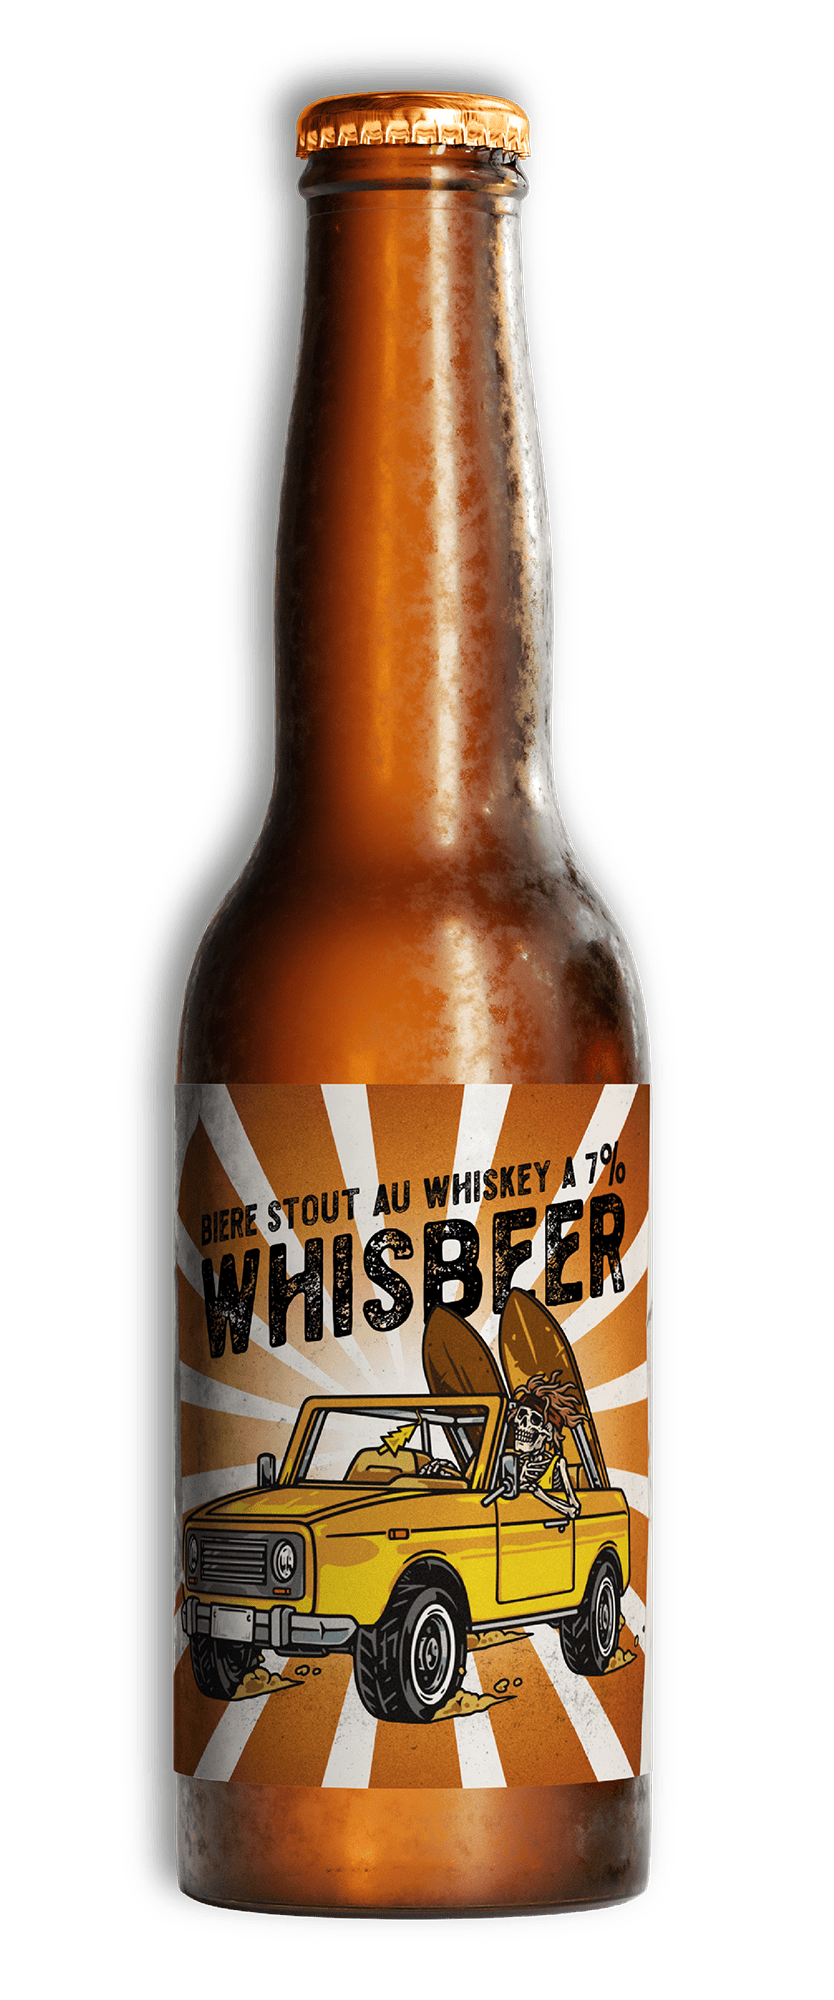 Bière Insulaire whisbeer micro brasserie insulaire normandie